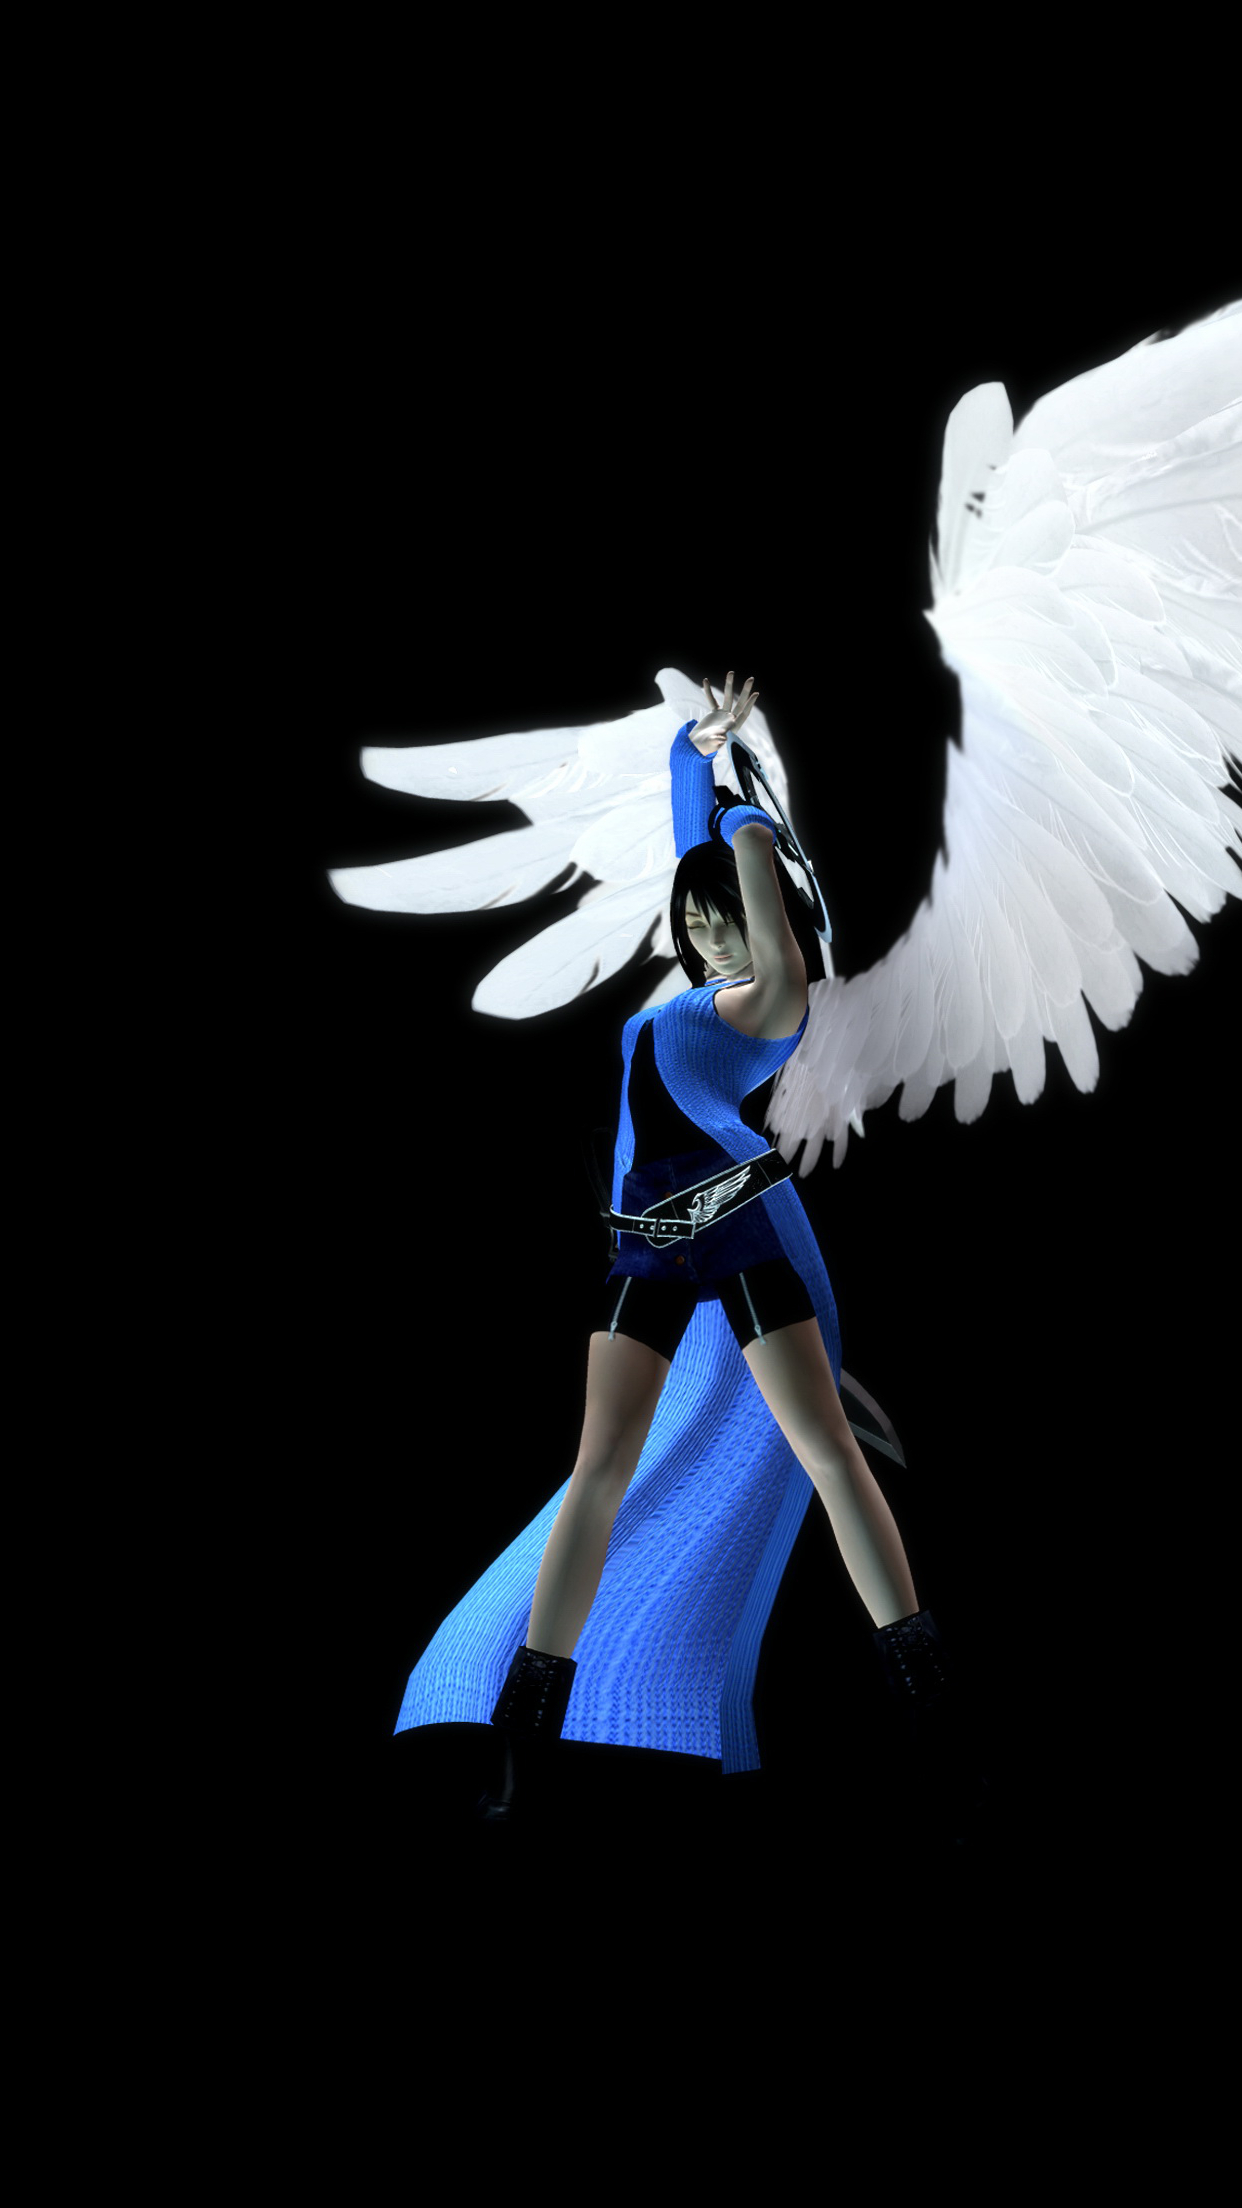 final fantasy iphone wallpaper,wing,figurine,animation,action figure,anime